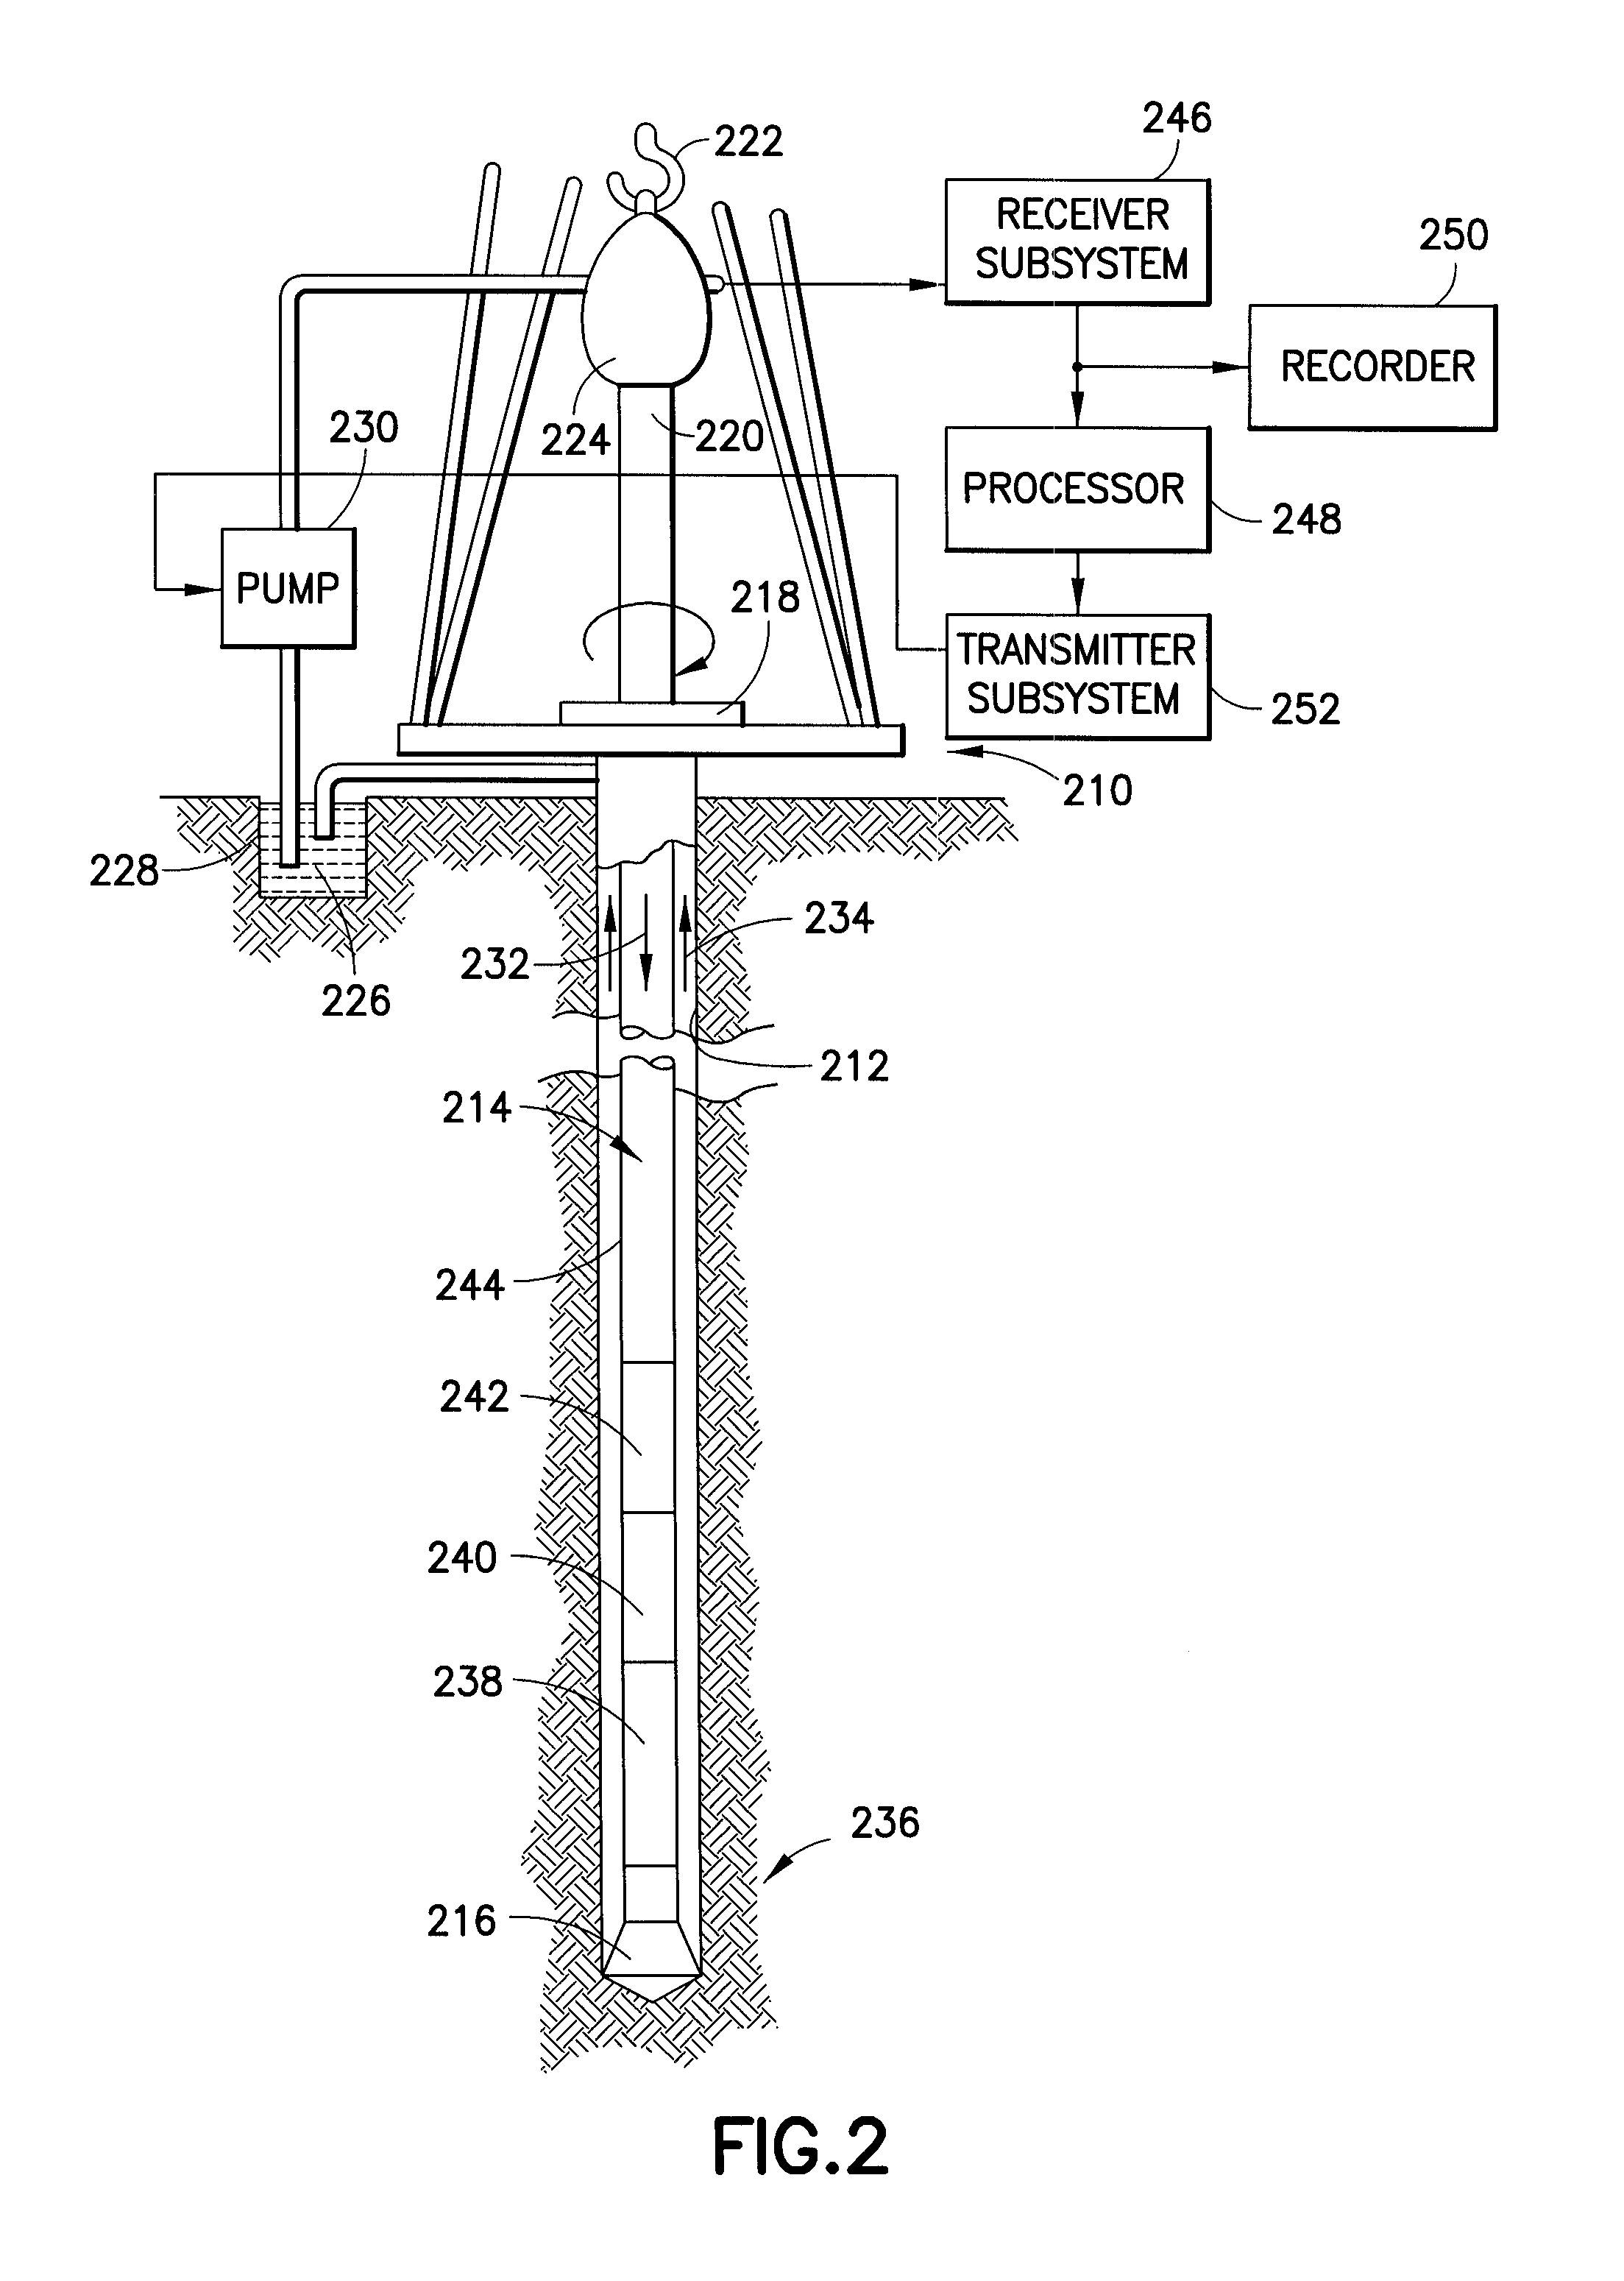 Well logging method for determining formation characteristics using pulsed neutron capture measurements